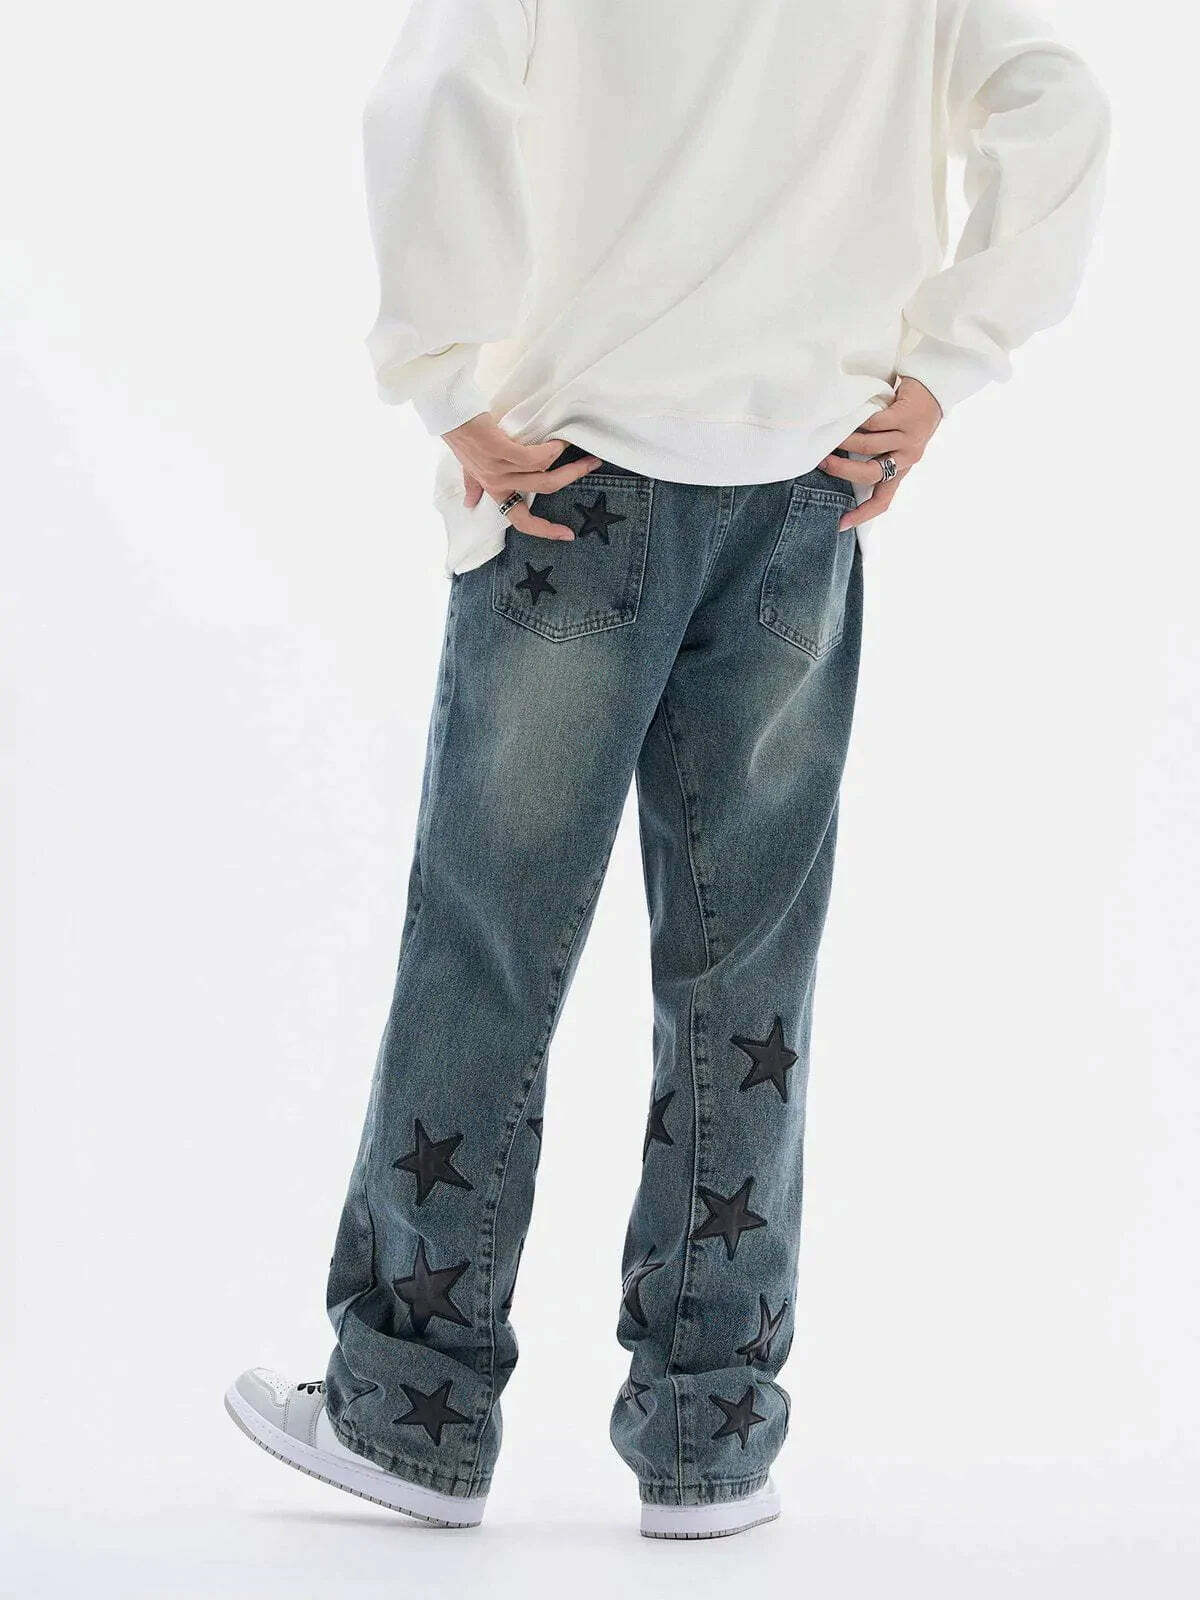 y2k star embroidered jeans retro edge & streetwear chic 7280